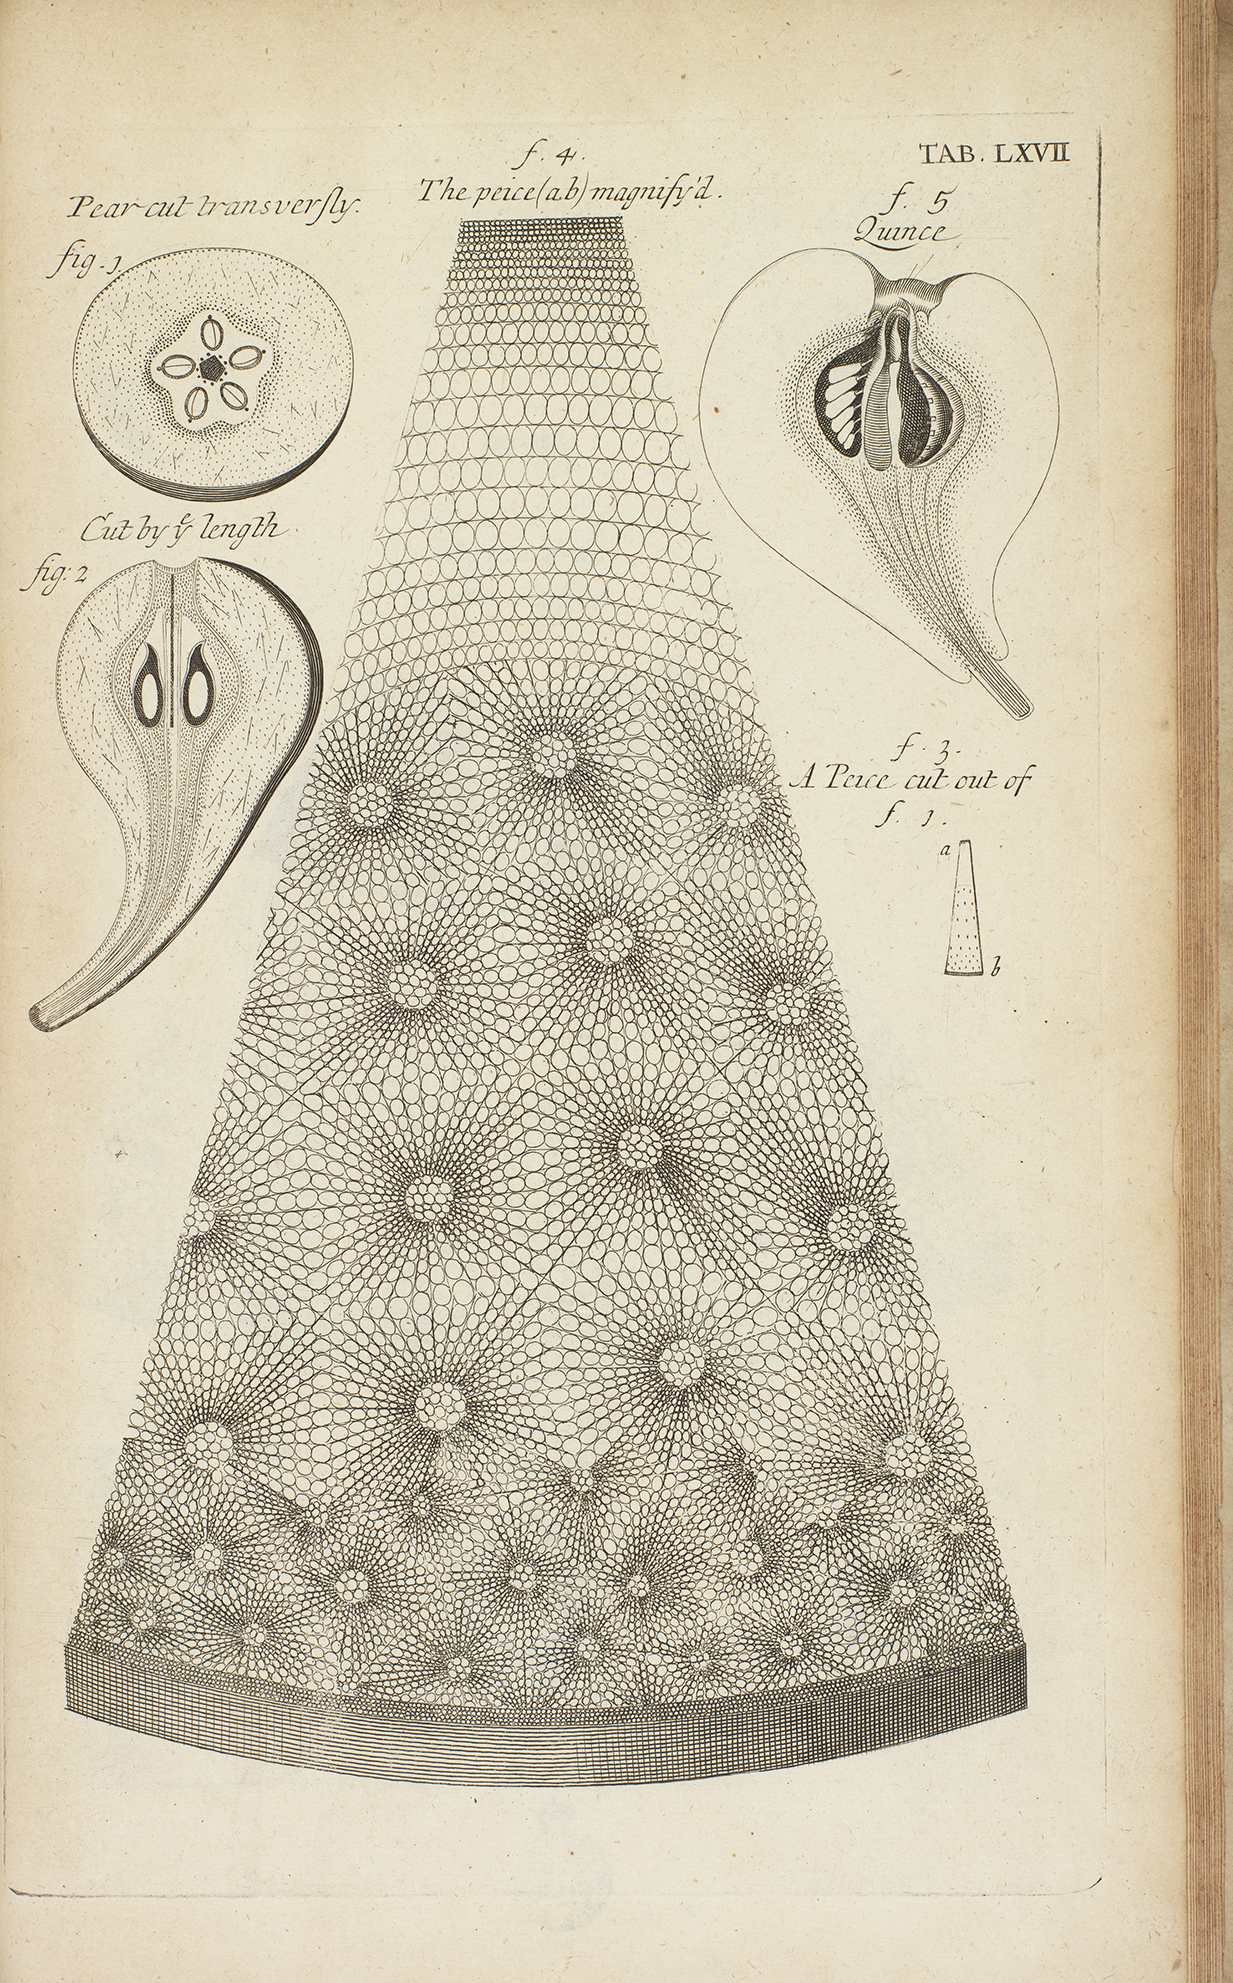 An illustration of an early microscopic image of a pear.